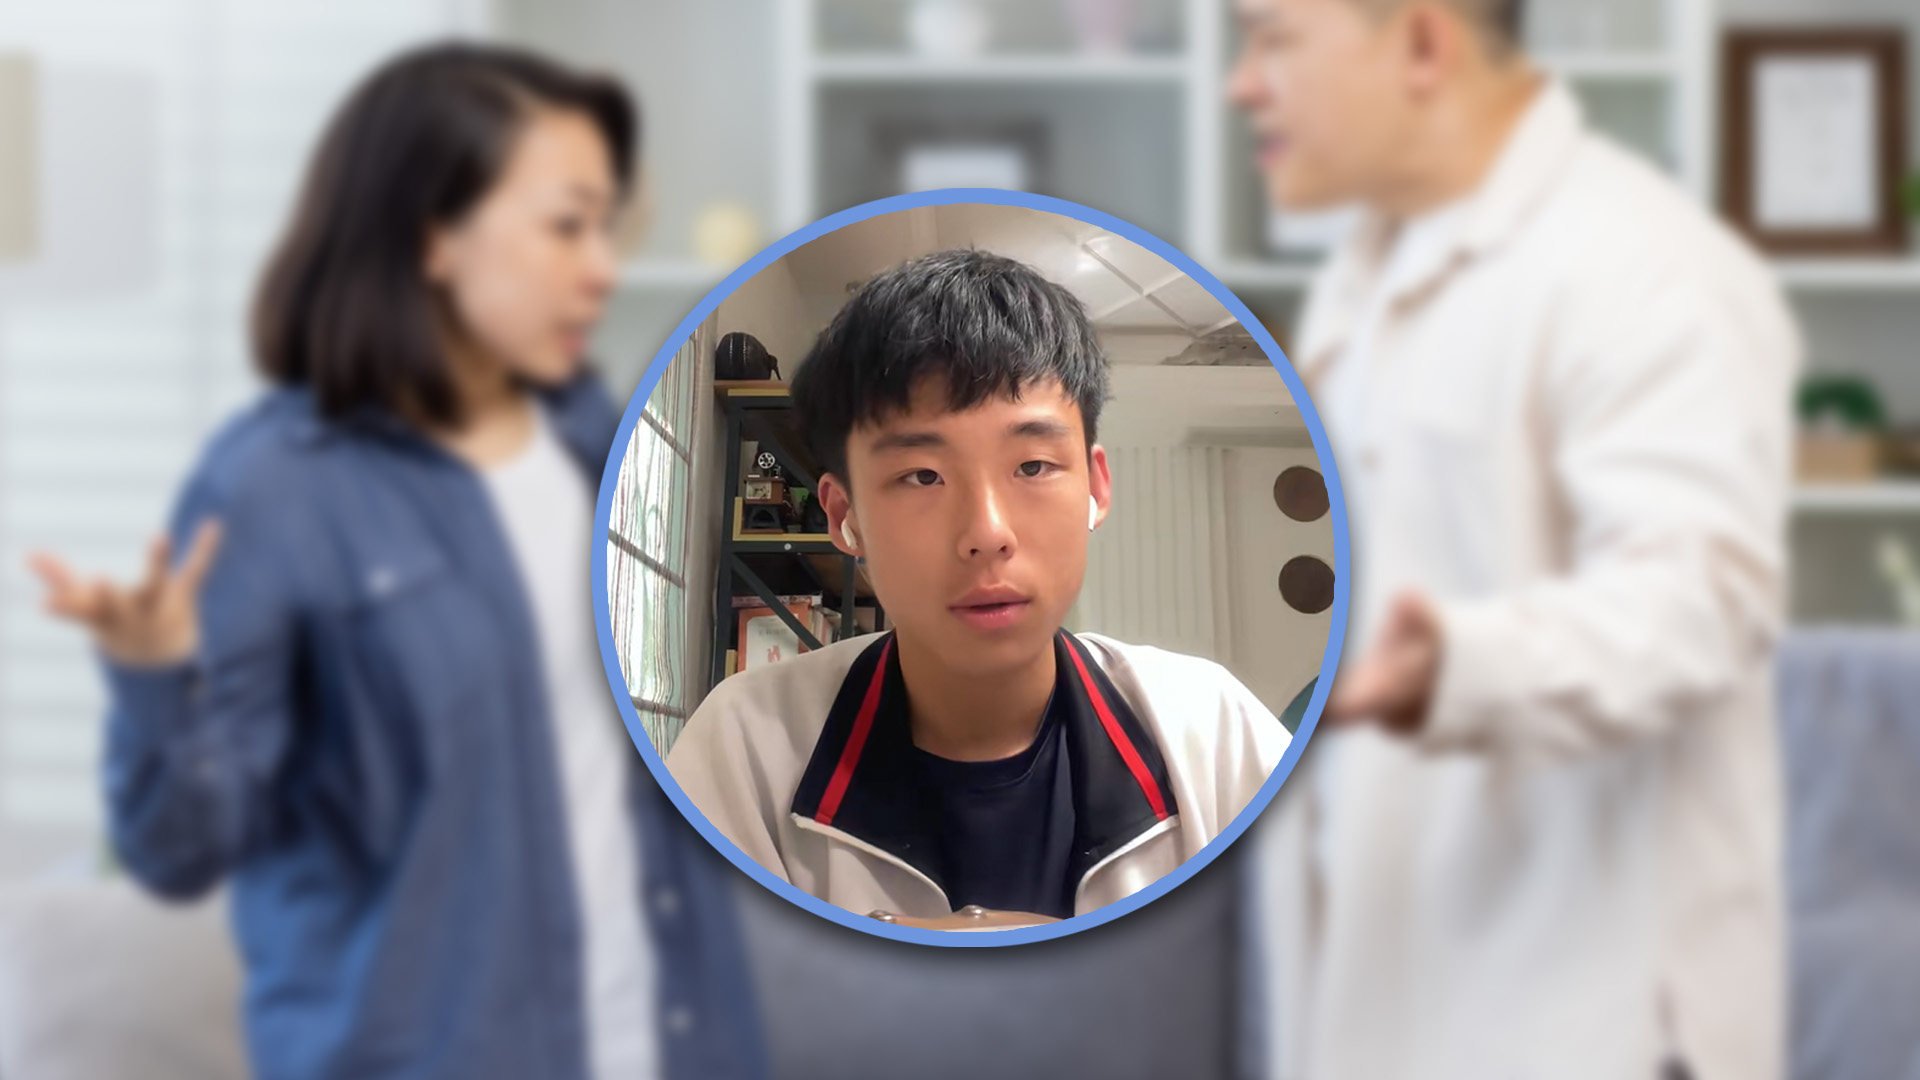 A Chinese teen boy urged his father to improve his attitude as a husband following a disagreement with his mother, sparking meaningful conversations about family harmony through his video. Photo: SCMP composite/Shutterstock/Douyin